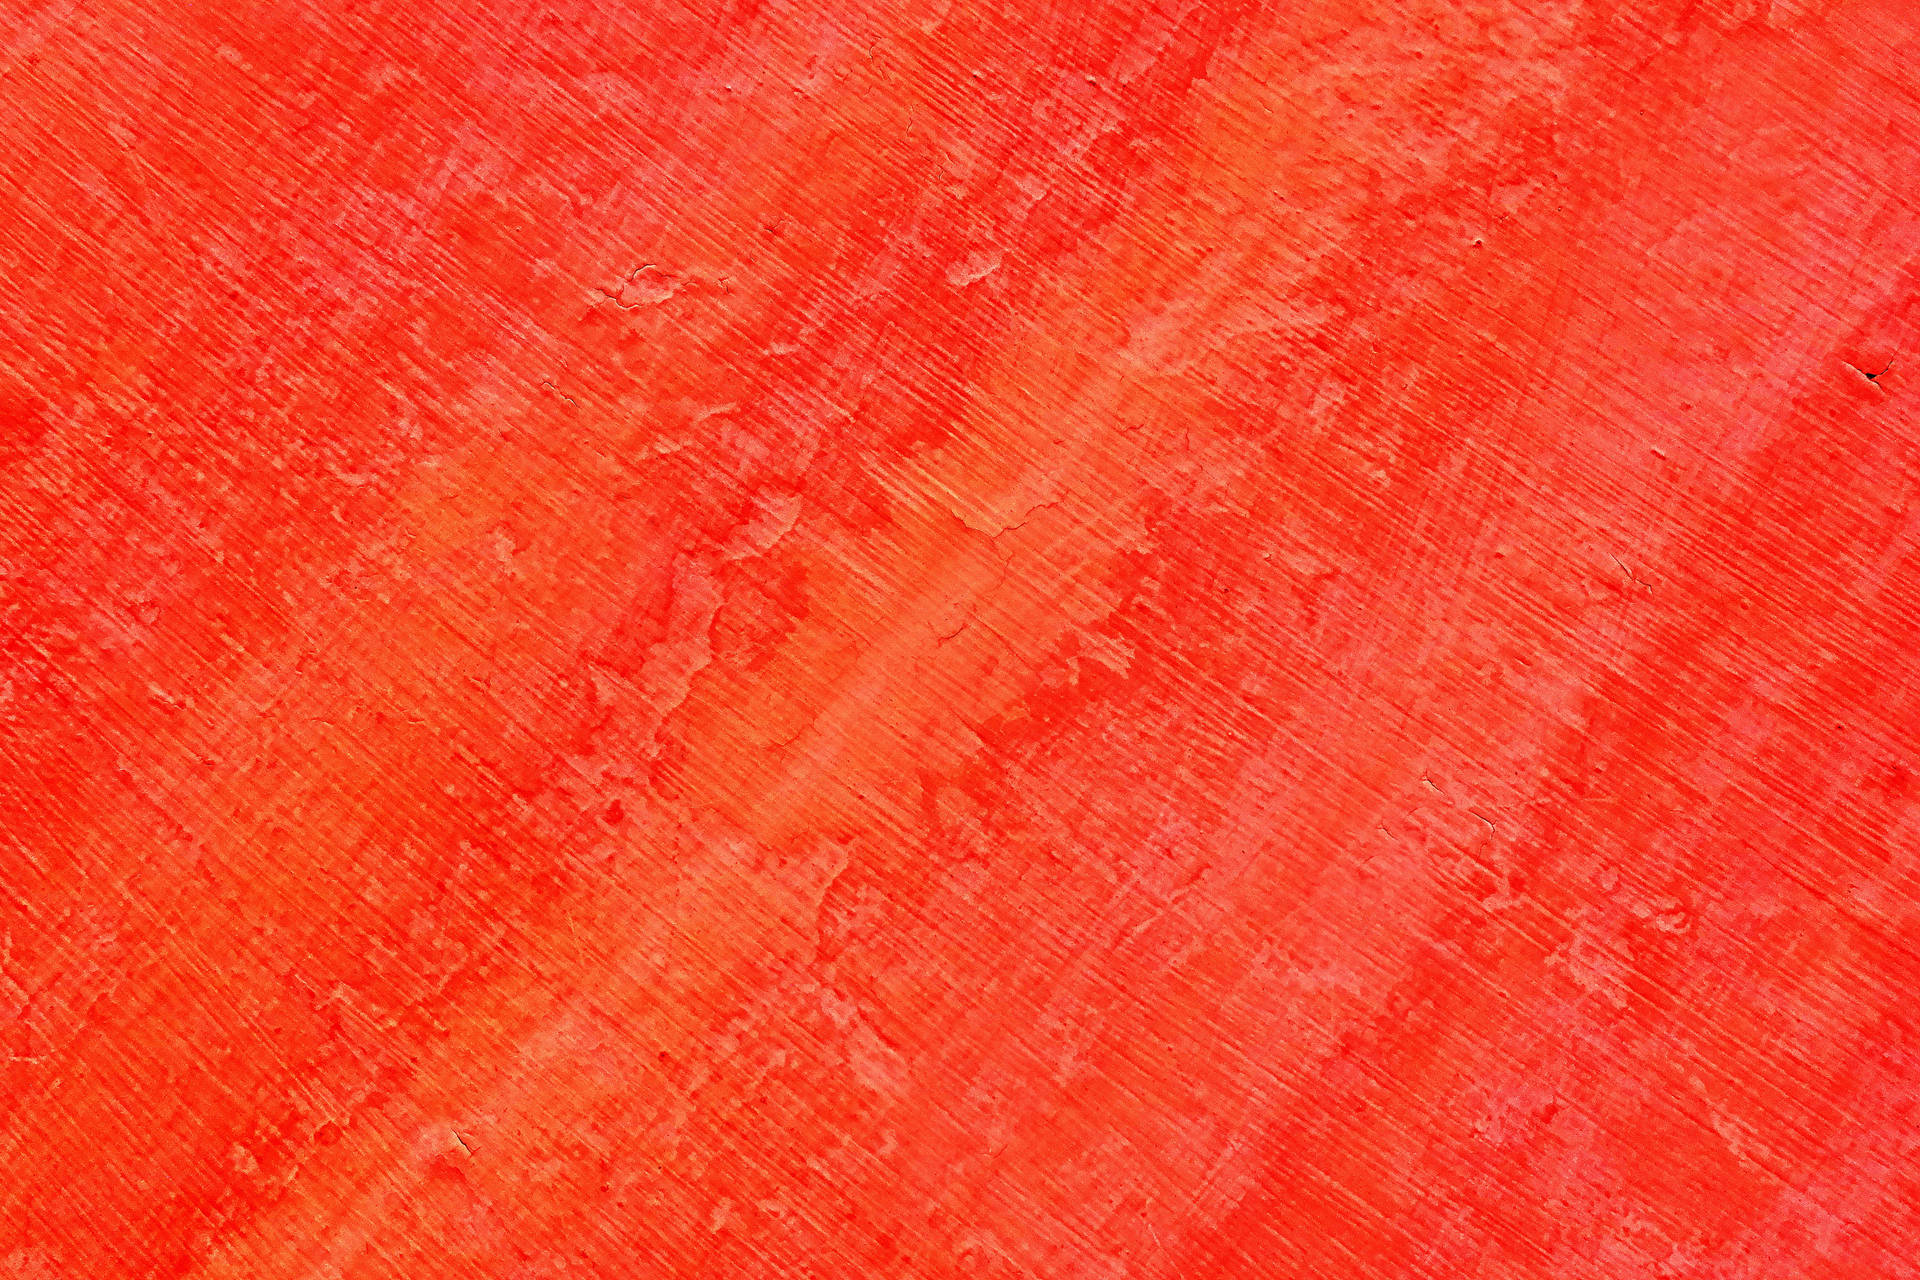 Textured 6000X4000 Wallpaper and Background Image